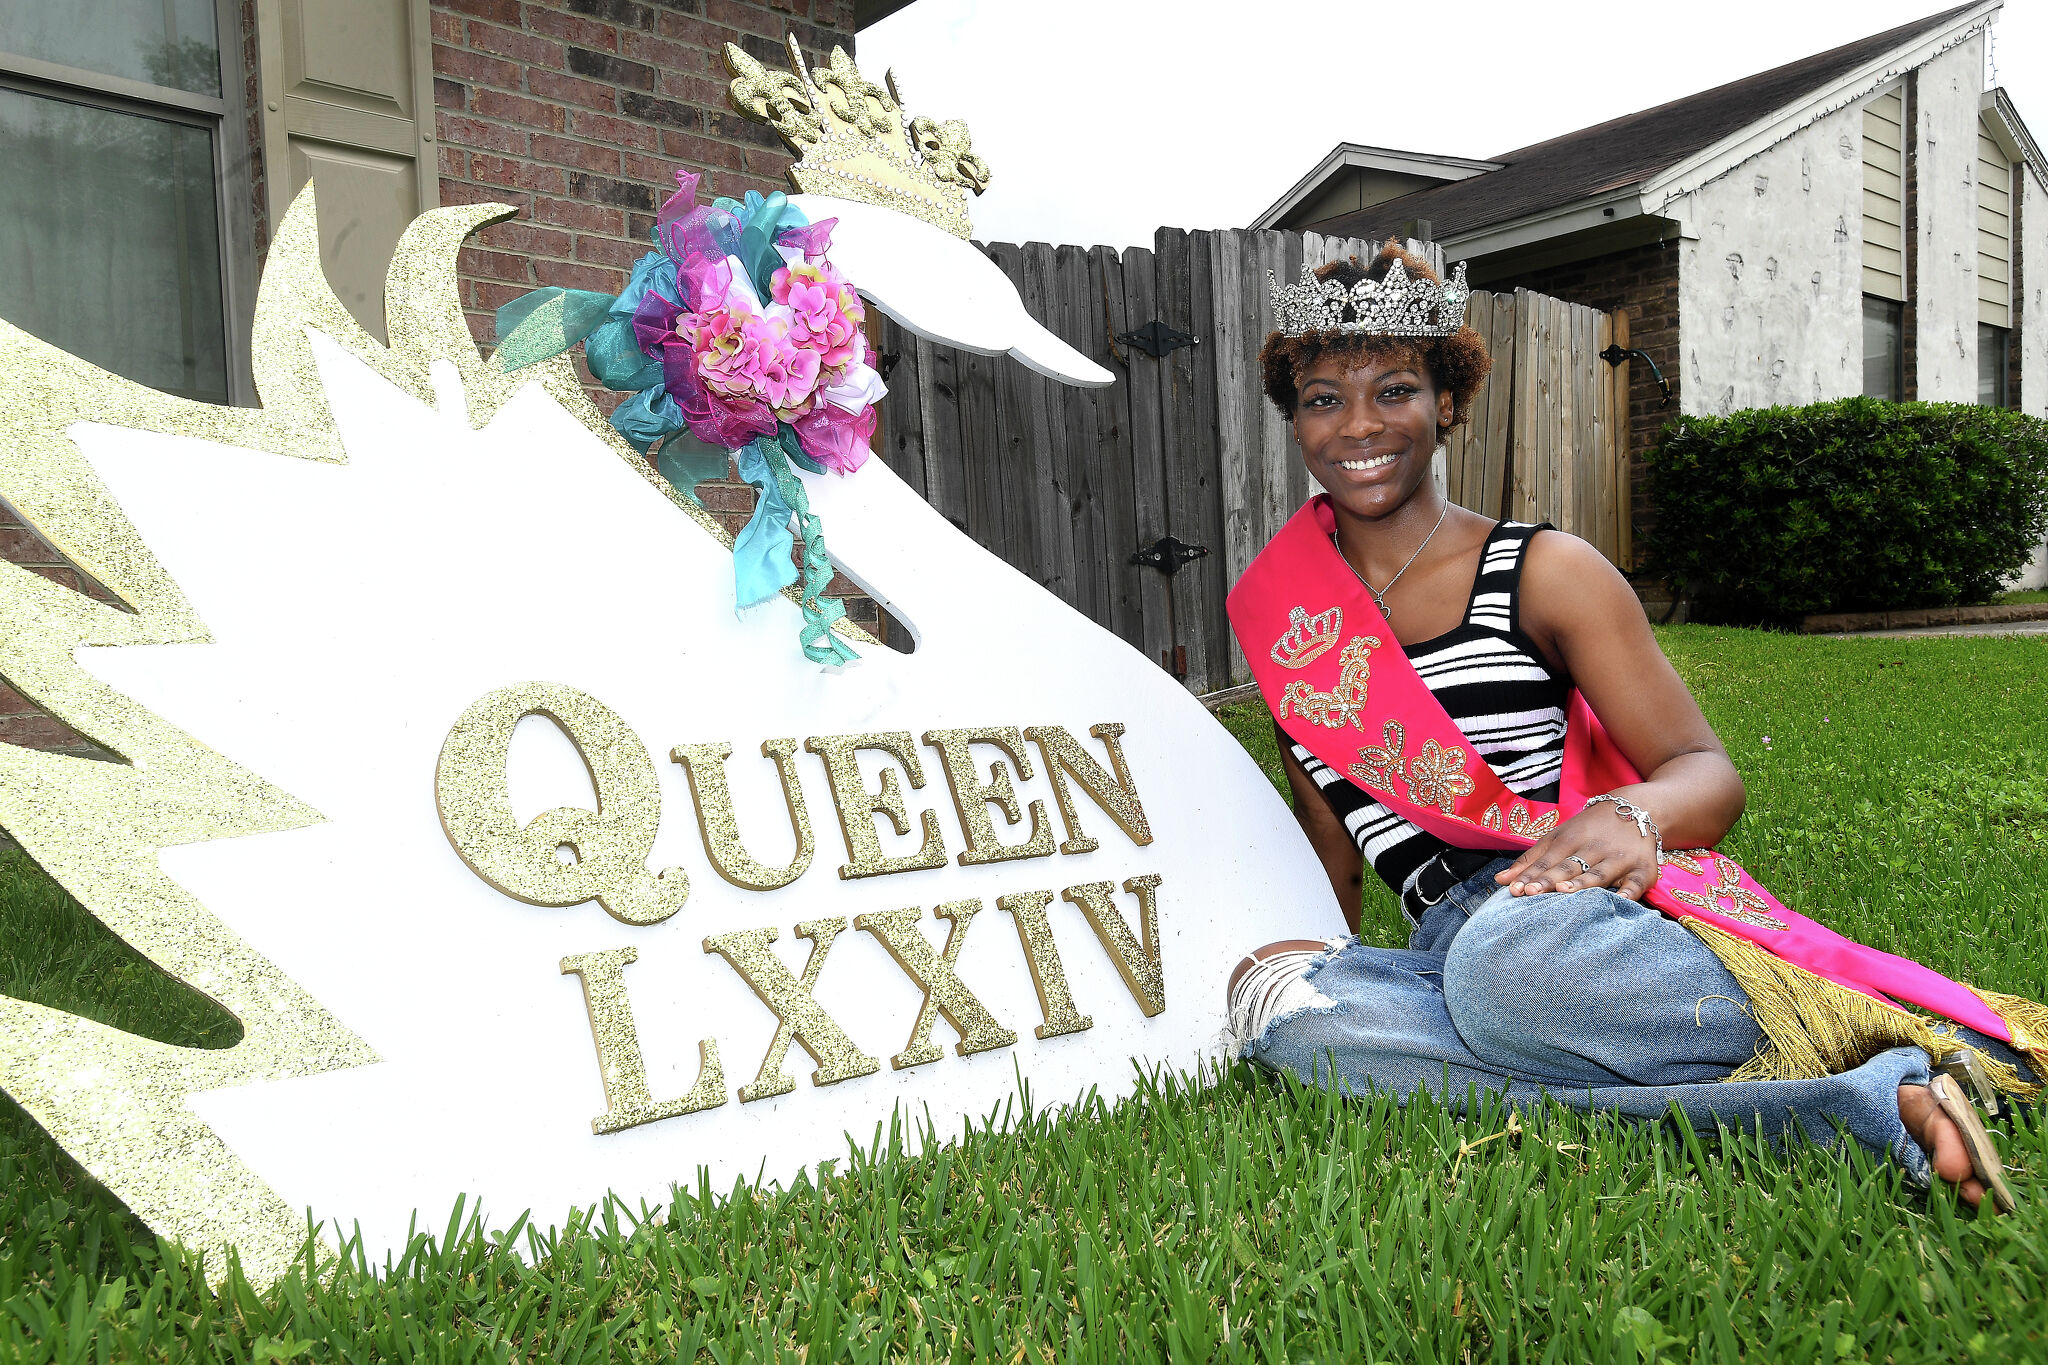 Neches River Festival's 74th queen is making history